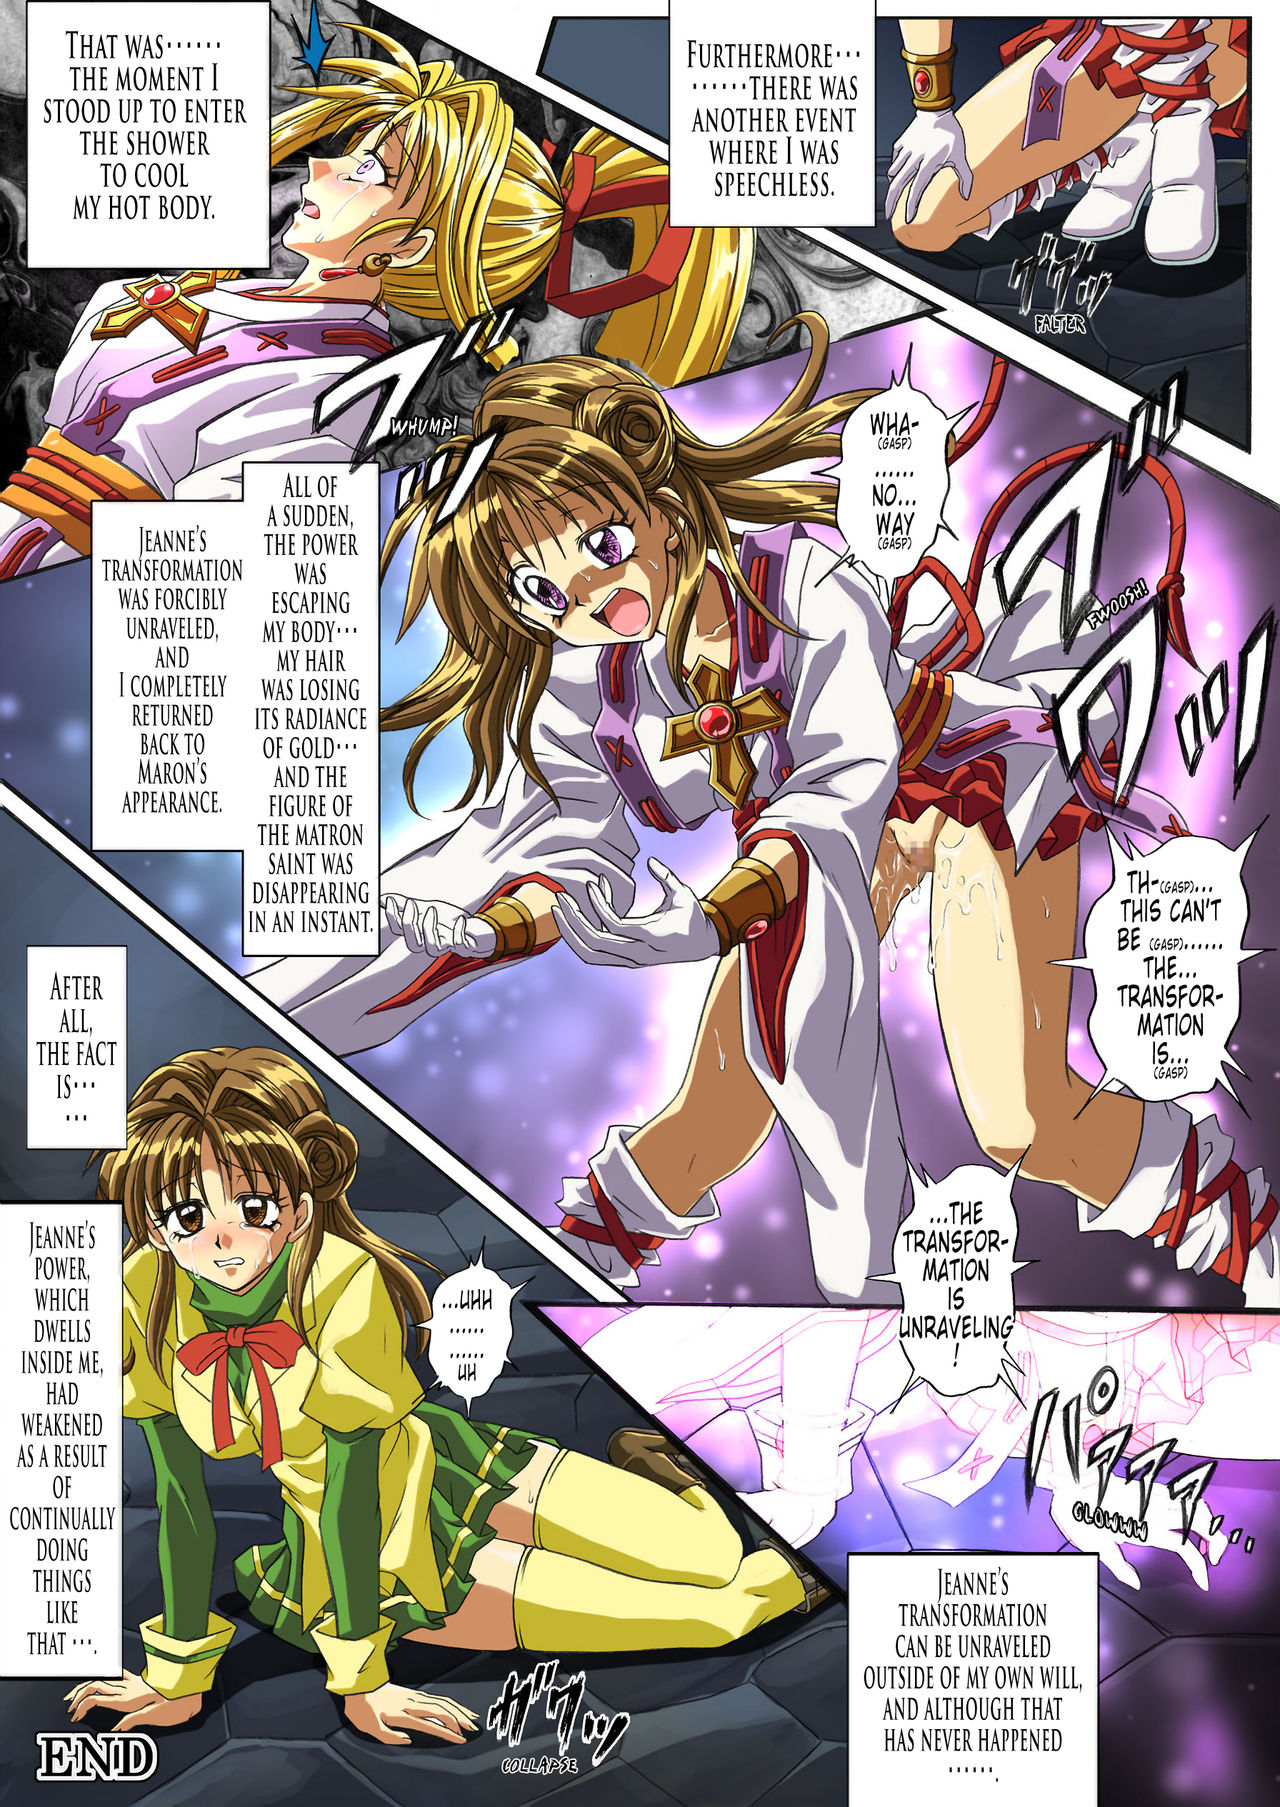 [Cyclone (Reisen Izumi)] {Kamikaze Kaitou Jeanne} Rogue Spear 208 - Rogue Spear 0.5~Maron&#039;s Diary [English   translated by Tonigobe] [Cyclone (冷泉和泉)](神風怪盗ジャンヌ) Rogue Spear 208 - ローグスピア 0.5 ~ まろんの日記 [トニゴビによる英訳]